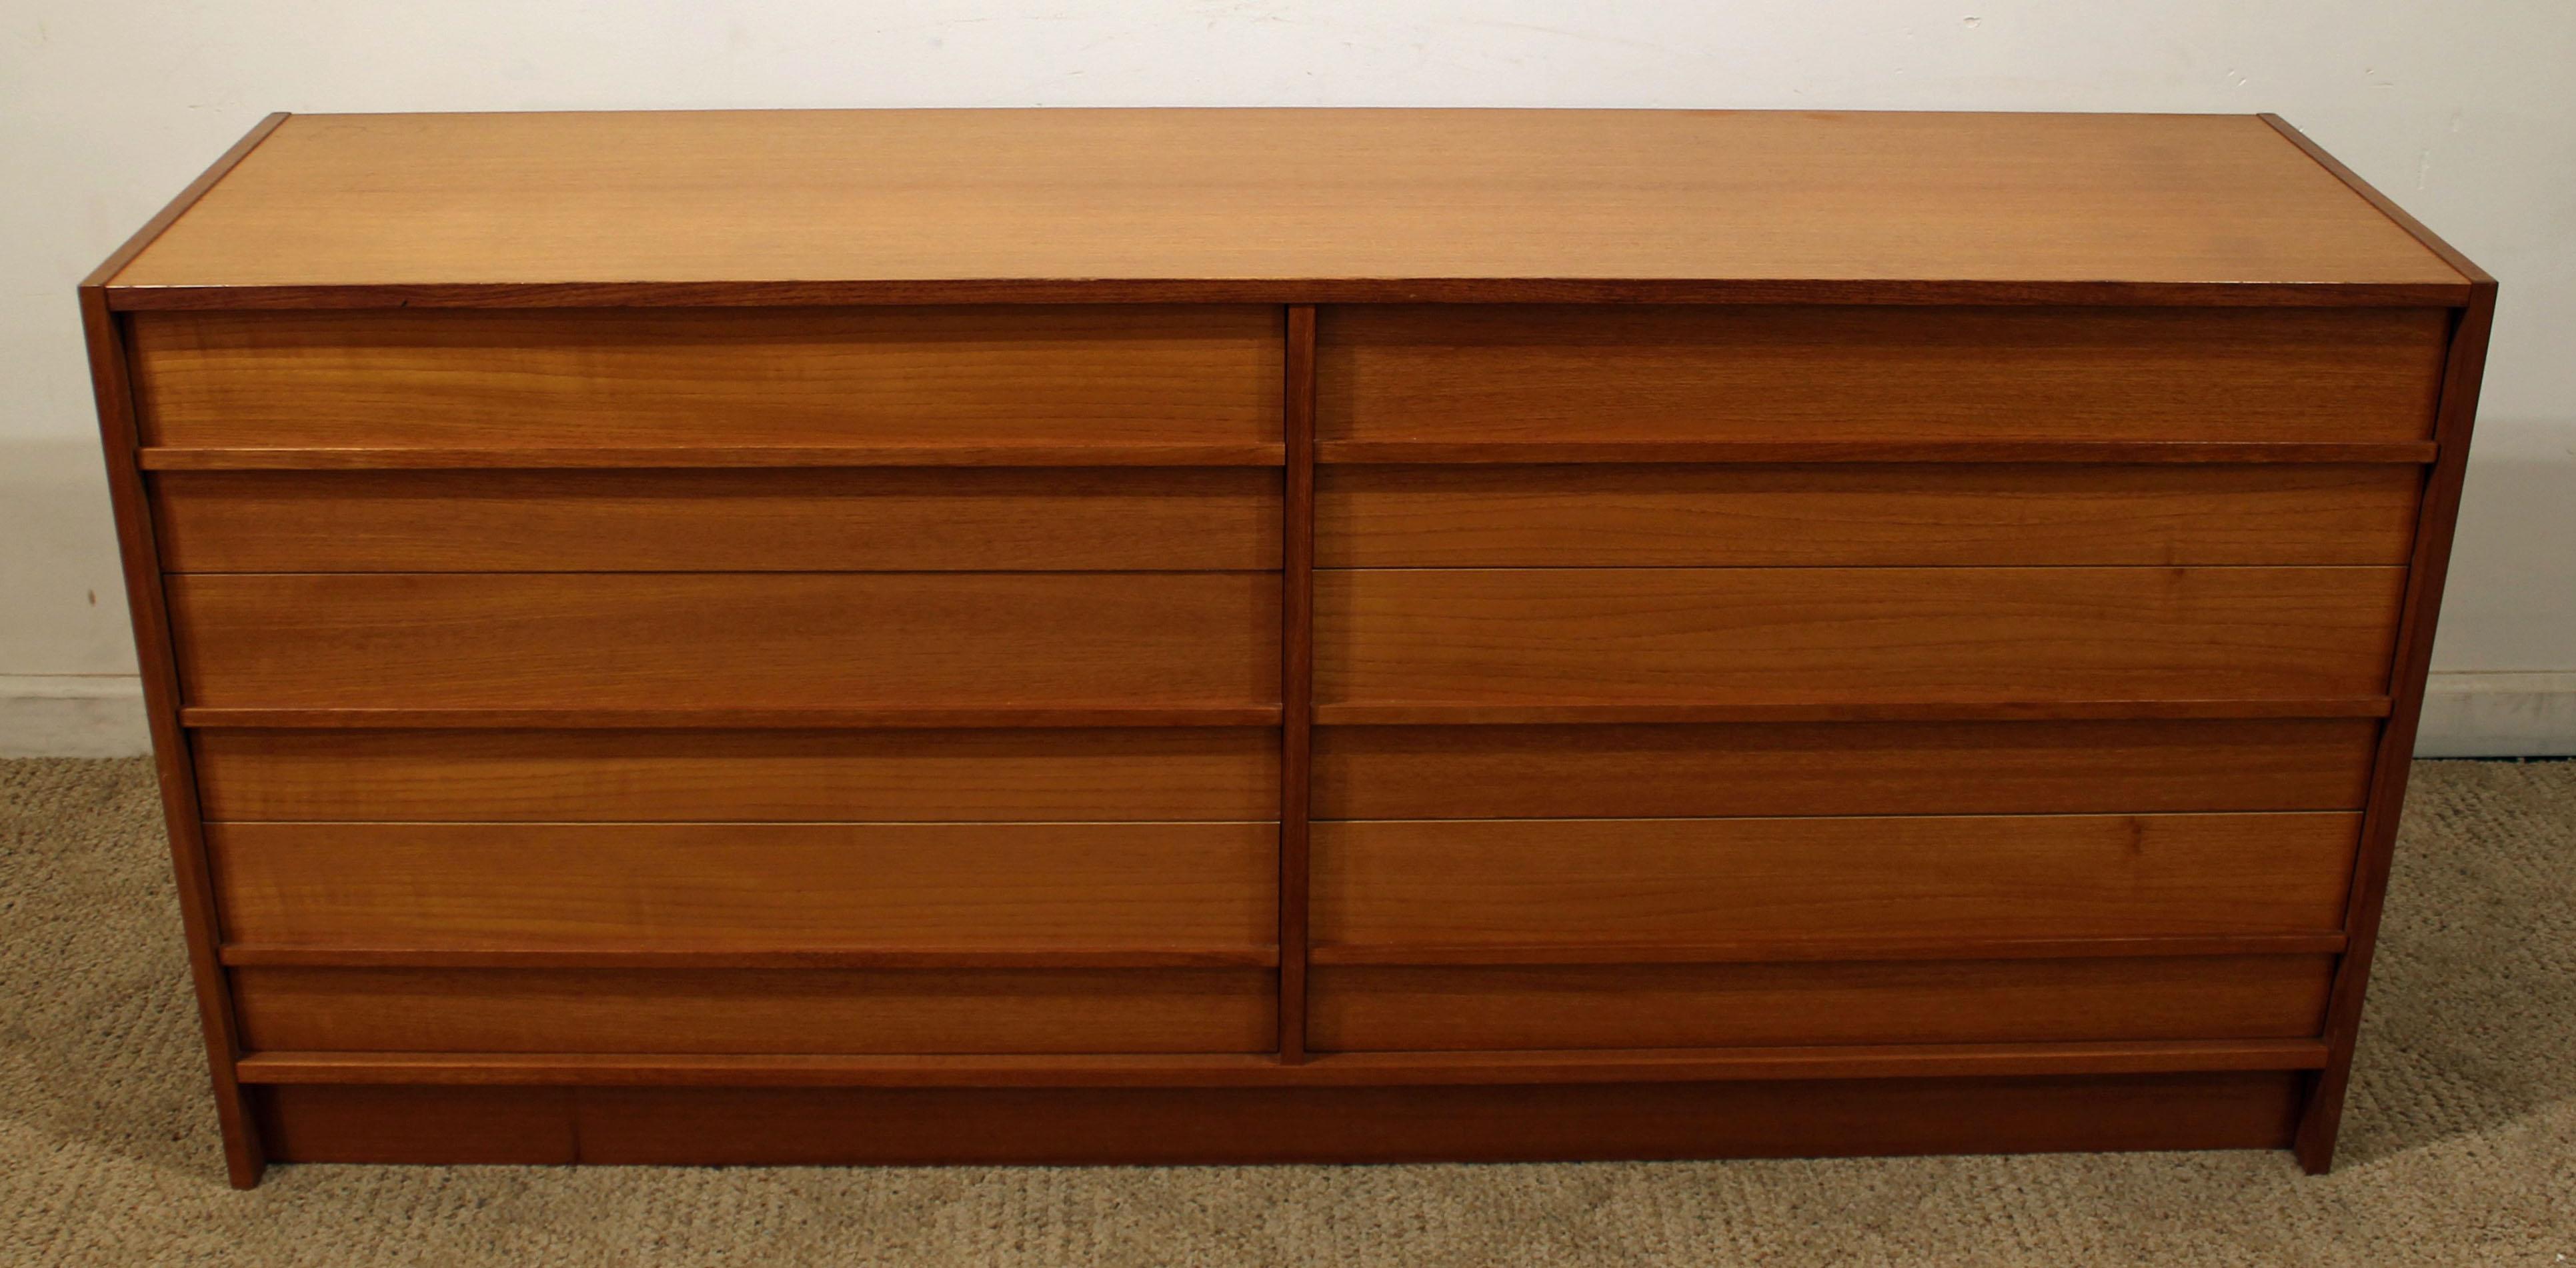 Offered is a Danish modern teak dresser with six drawers. It is in good condition, showing normal age wear, but nothing overly noticeable. It is not signed. This piece came out of a local estate. 

Dimensions:
59.25